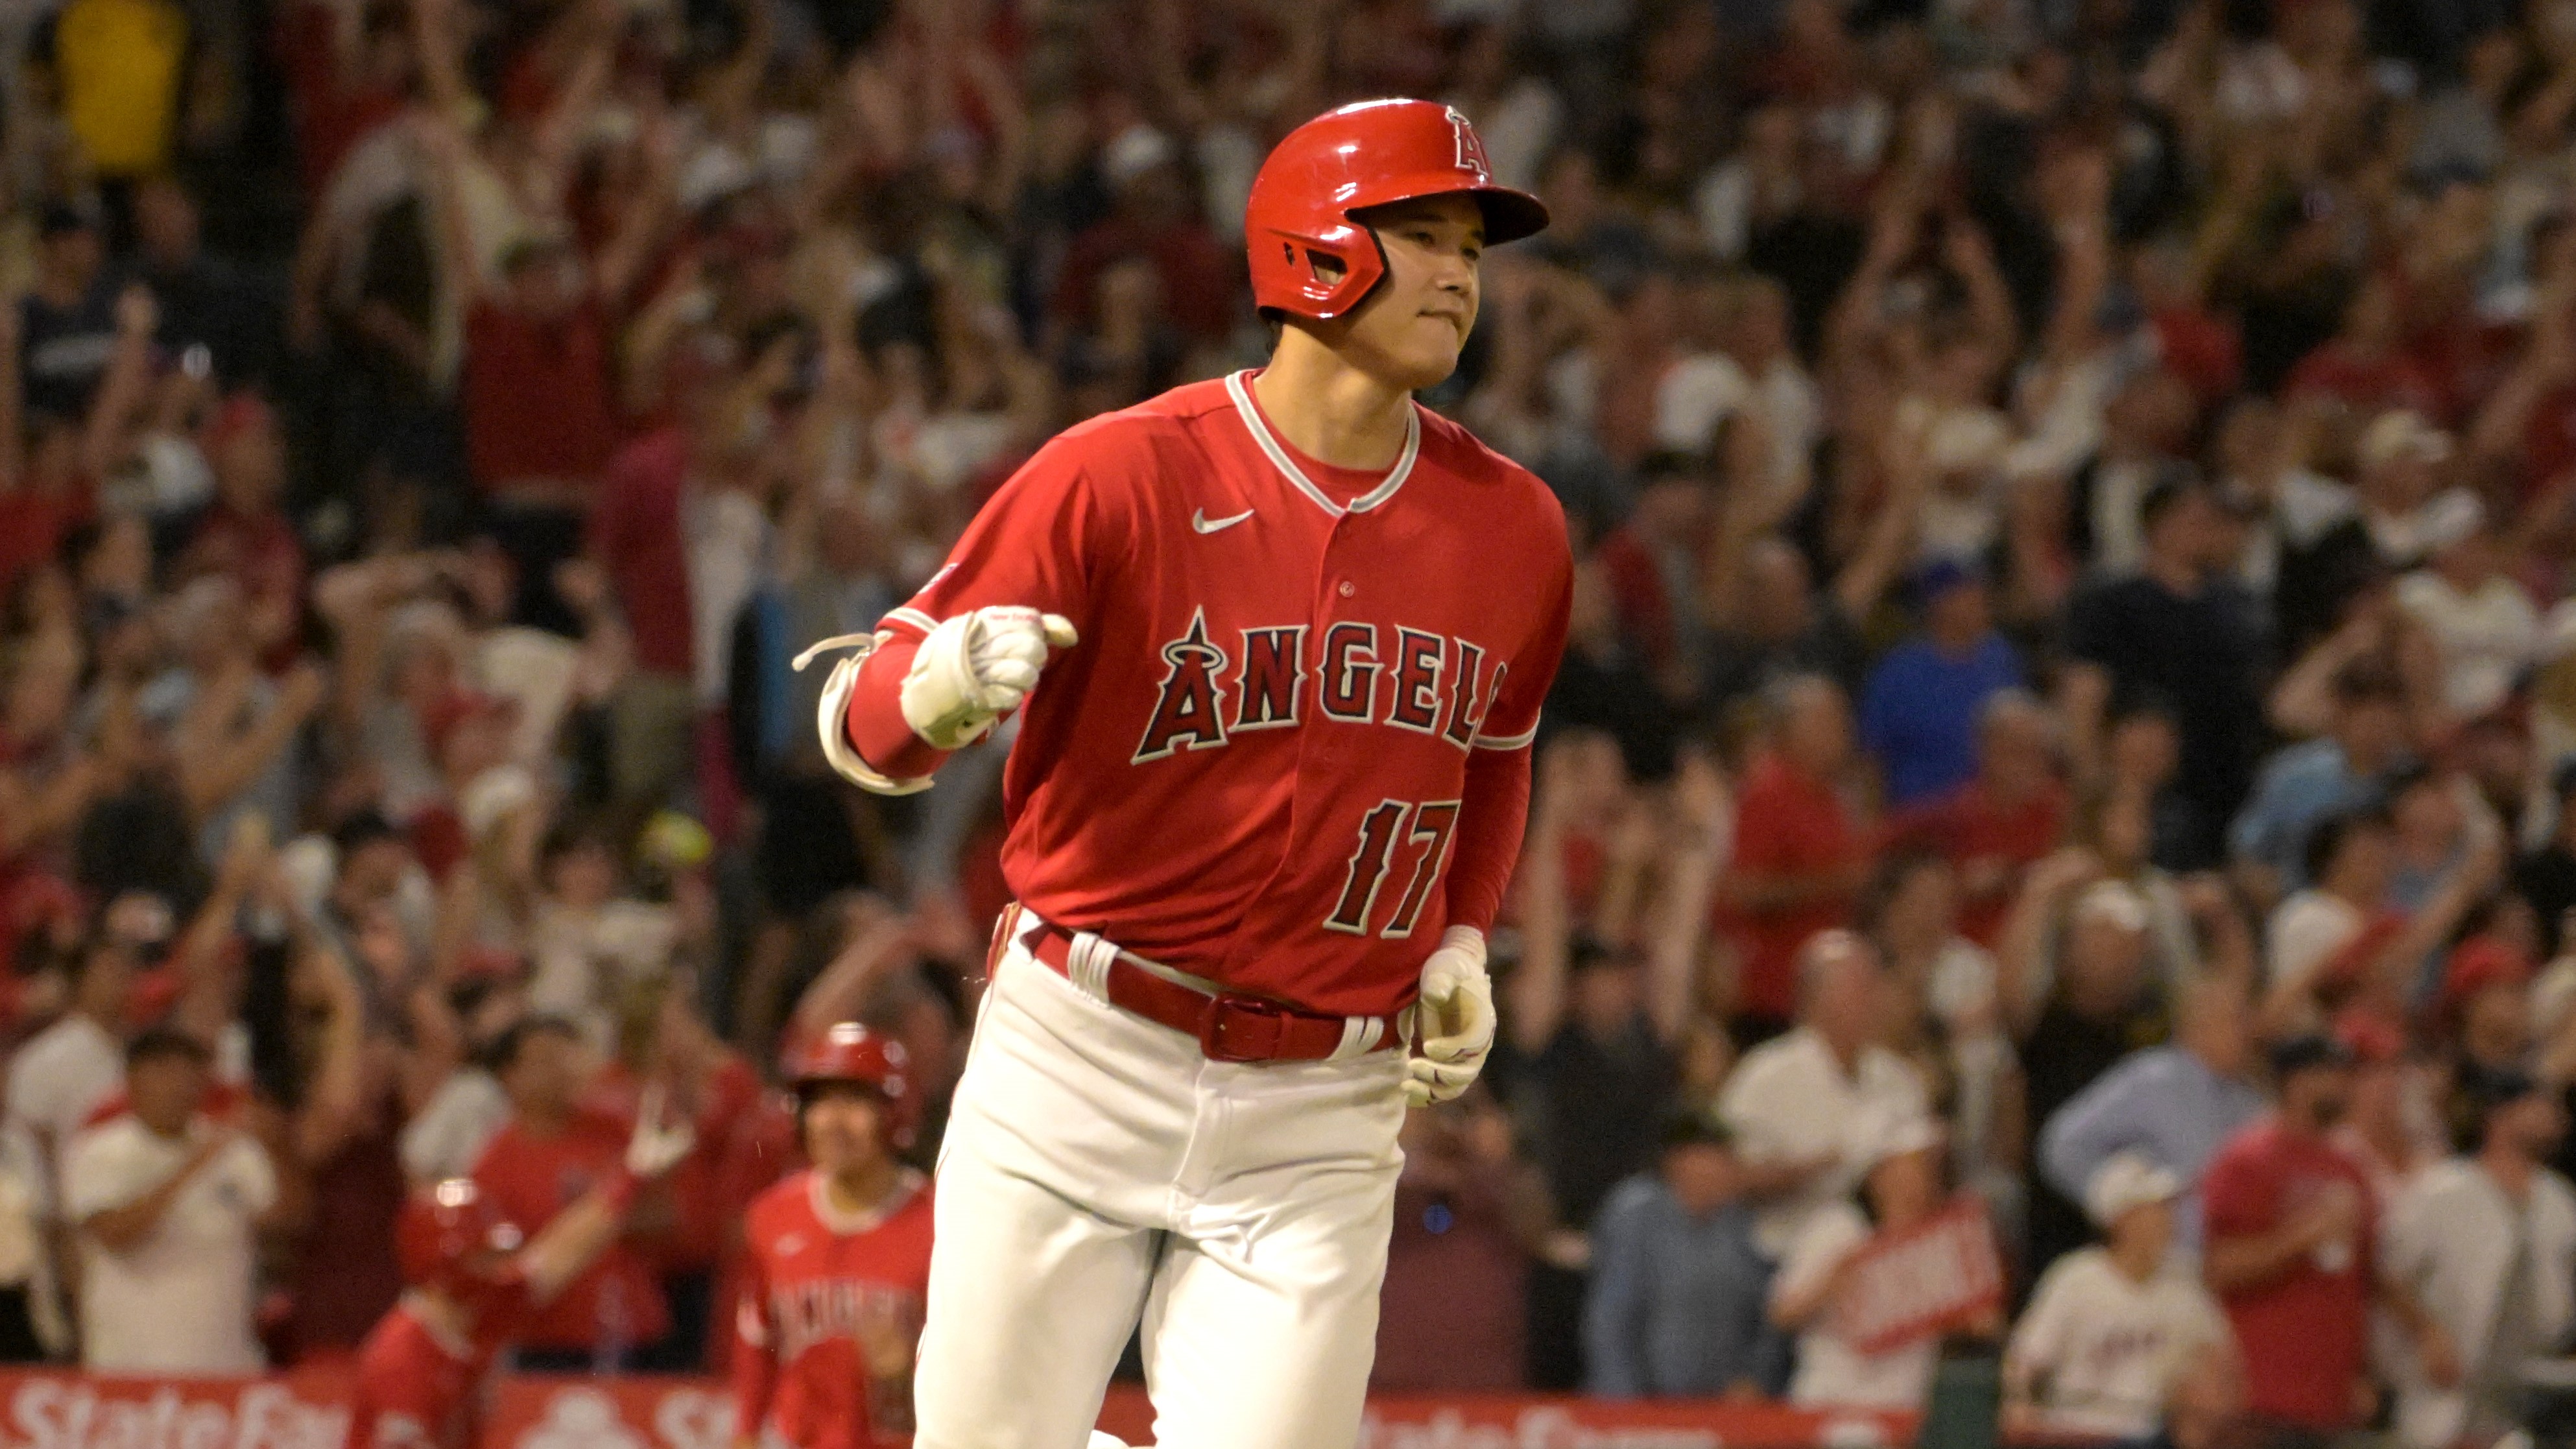 Aaron Judge reacts to Shohei Ohtani's 'incredible' HR pace, possibility